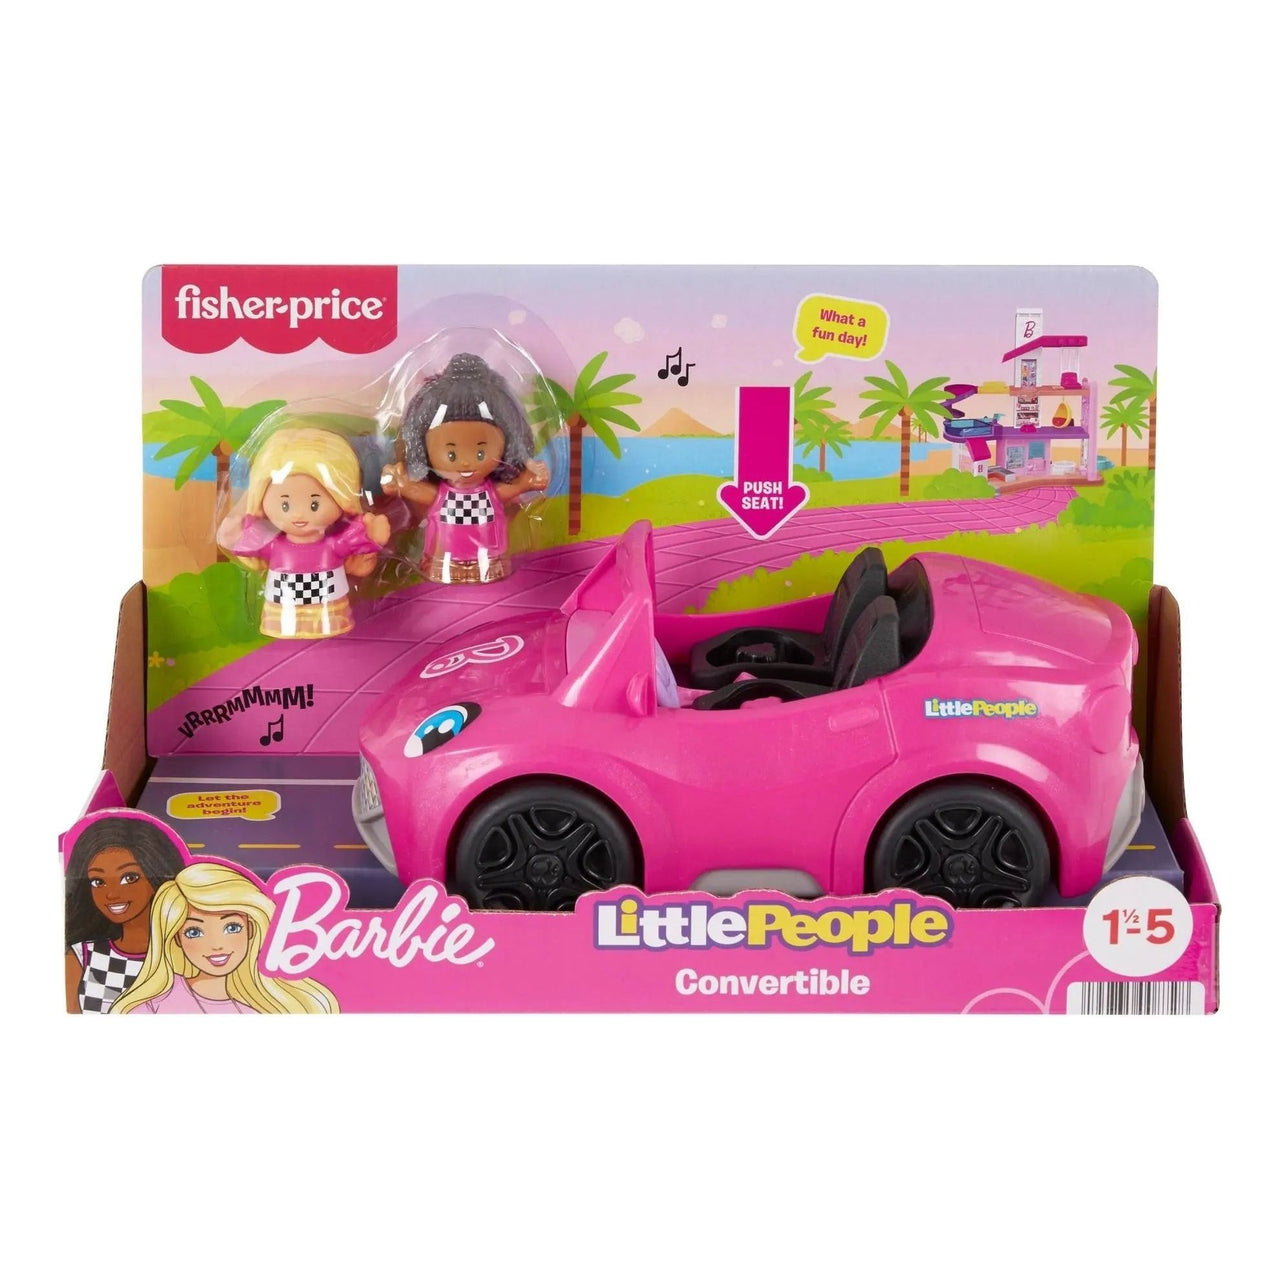 Fisher-Price Little People Barbie Convertible Fisher-Price